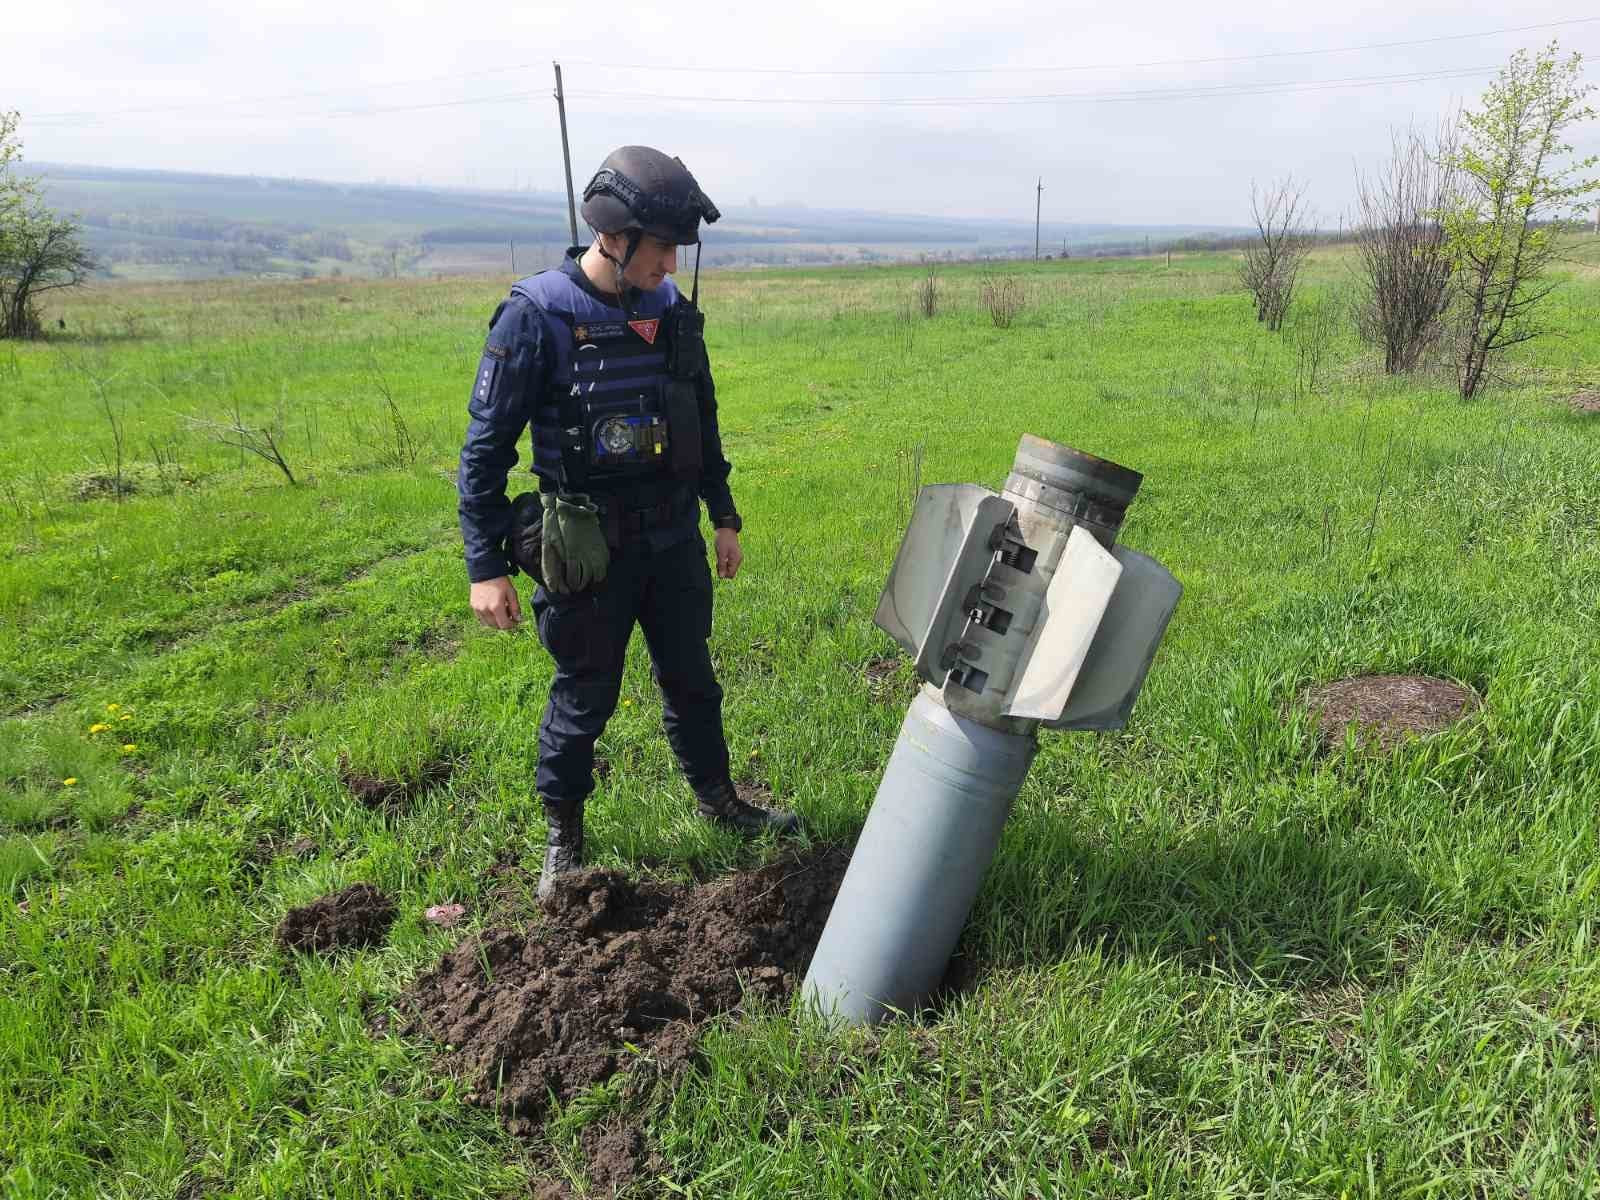 Russian missile in the Ukrainian field © The State Emergency Service of Ukraine